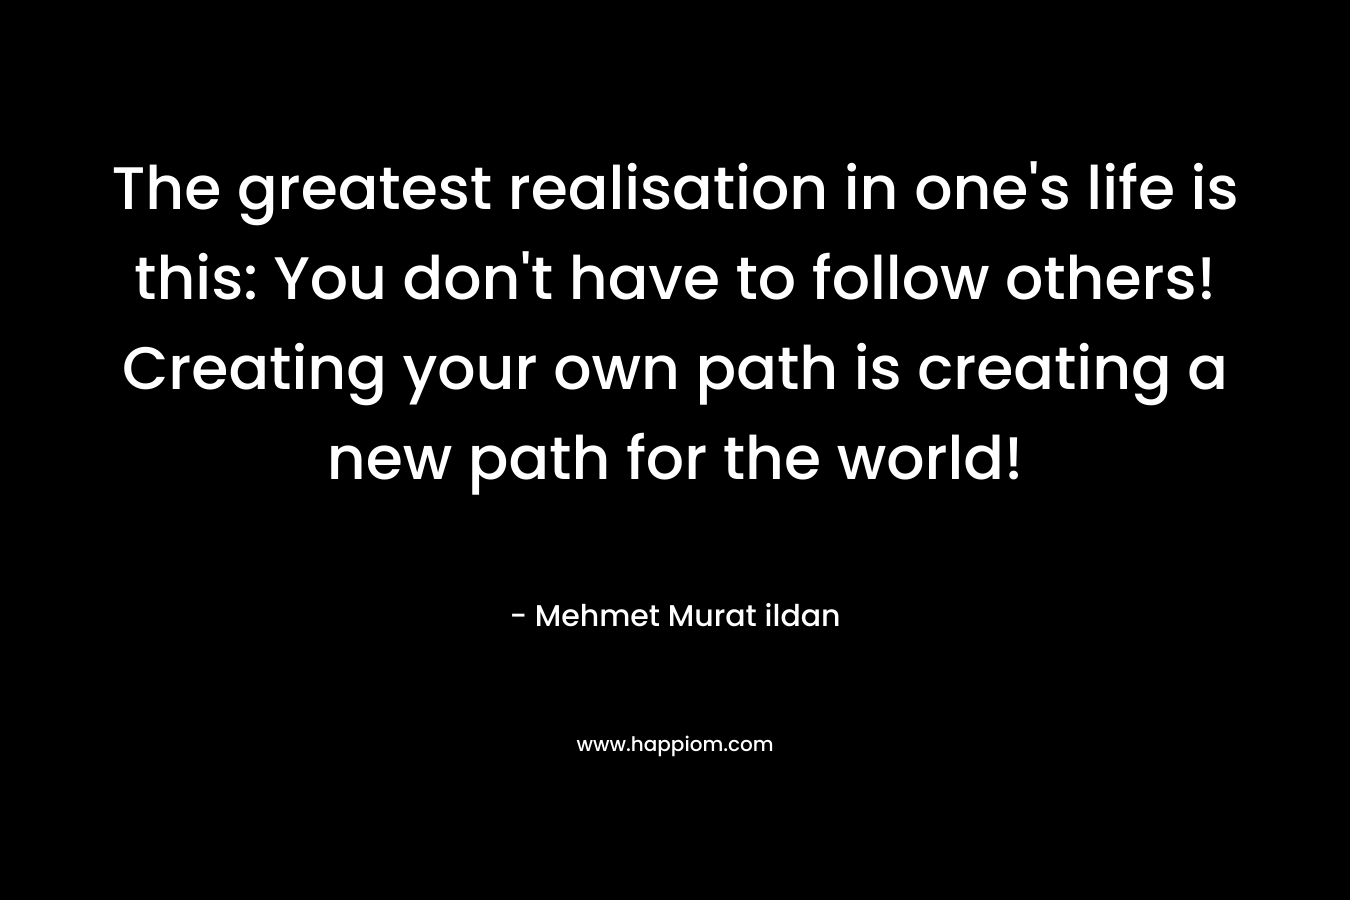 The greatest realisation in one’s life is this: You don’t have to follow others! Creating your own path is creating a new path for the world! – Mehmet Murat ildan